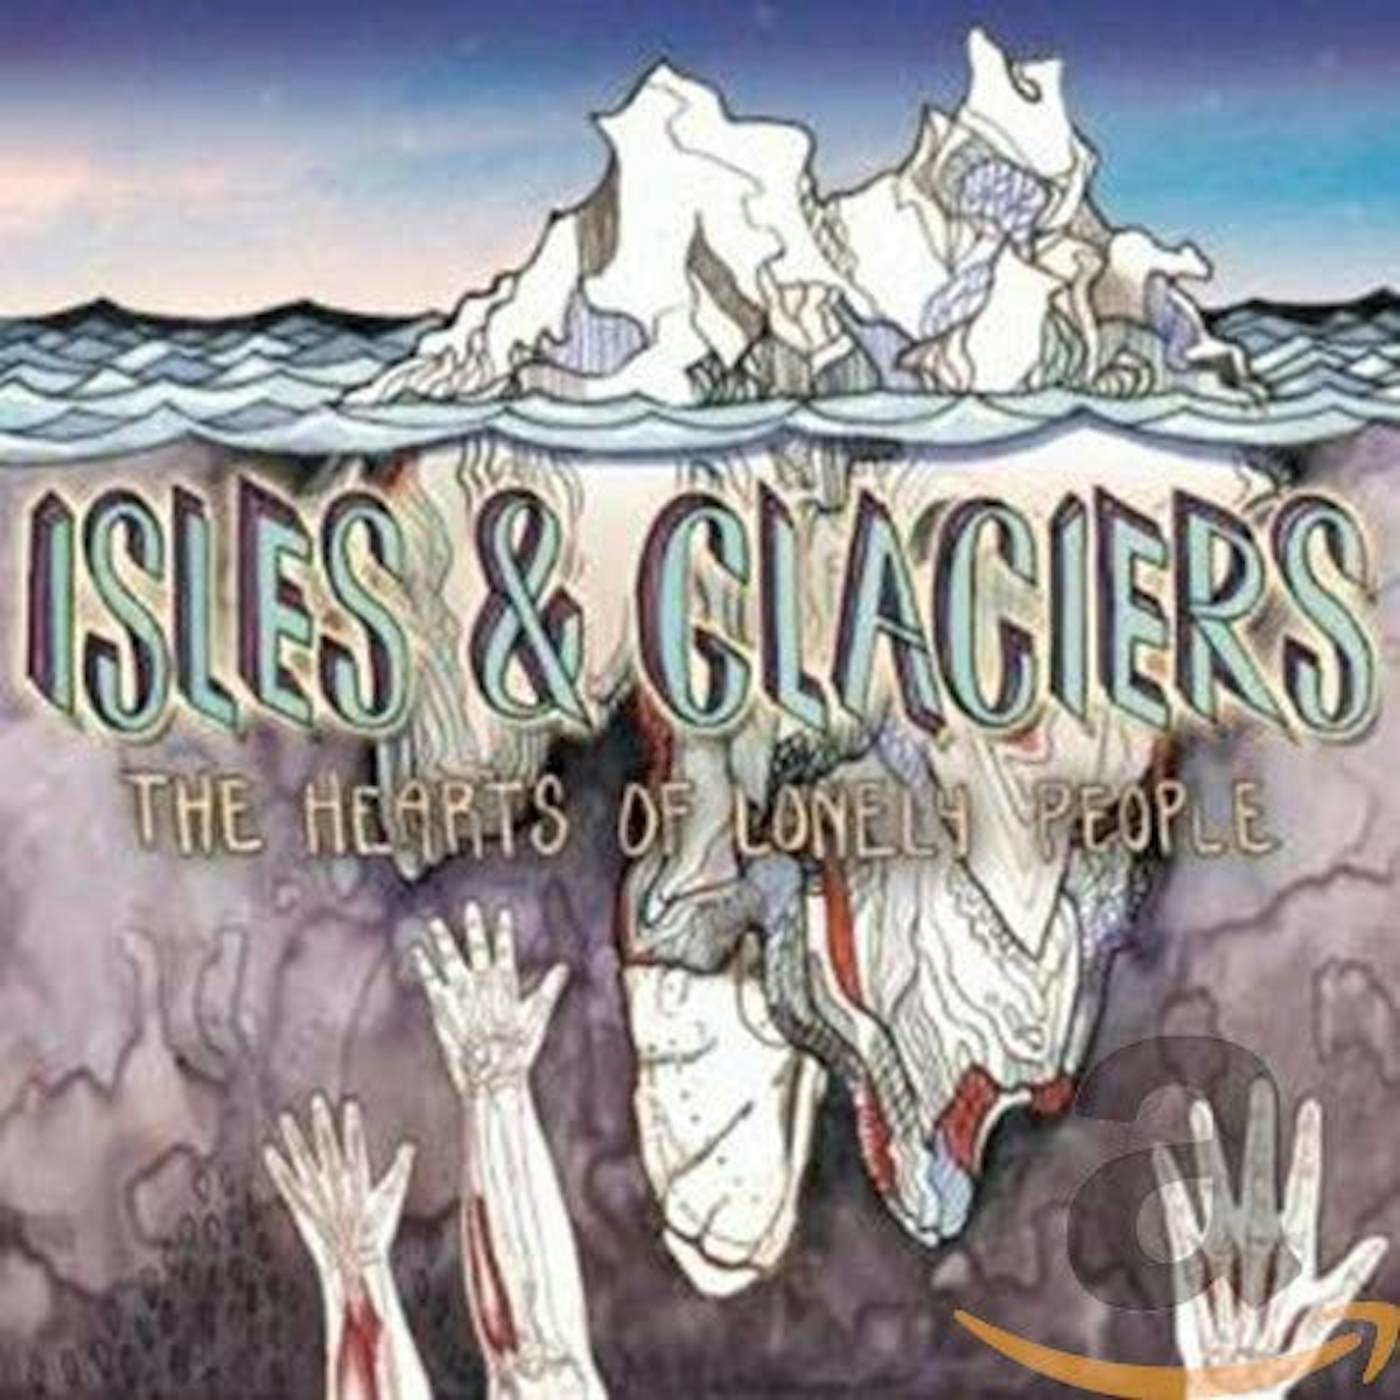 Isles & Glaciers The Hearts Of Lonely People (Remixes) Vinyl Record